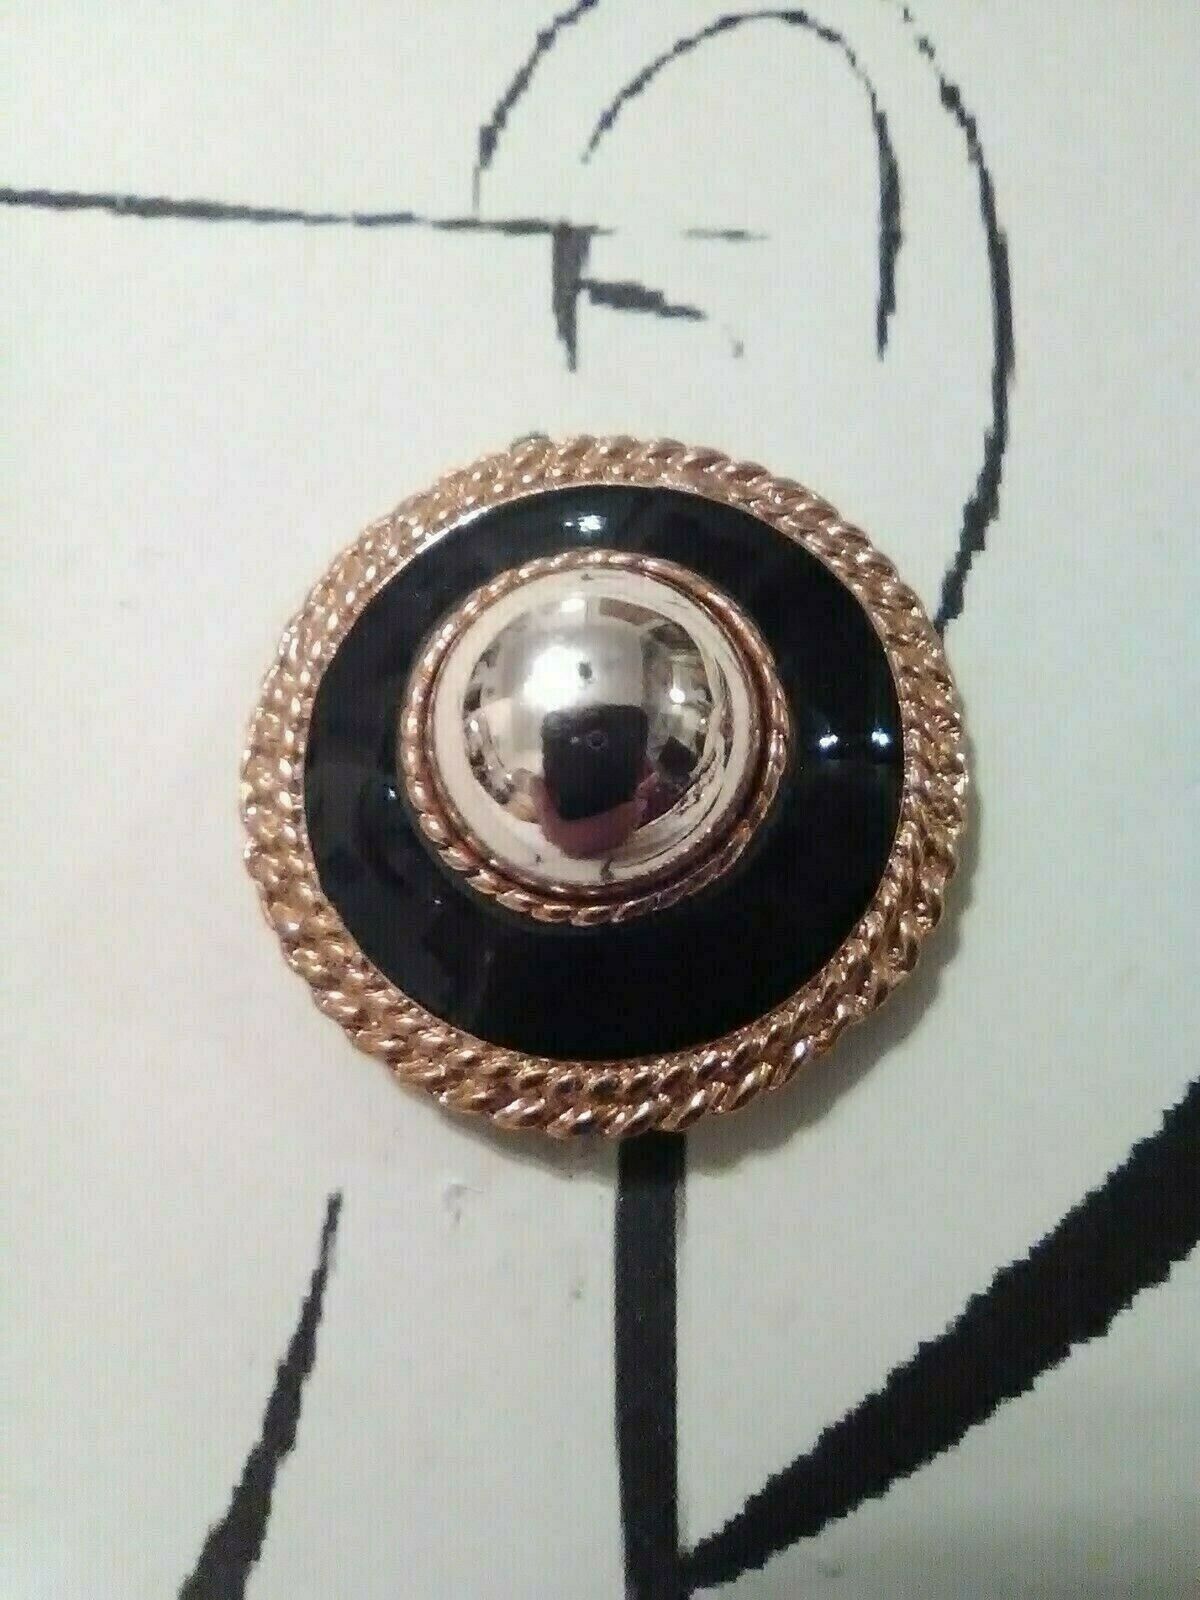 Primary image for VINTAGE FASHION CLIP EARRINGS GOLDEN BUTTON BLACK ENAMEL CHAIN ACCENT